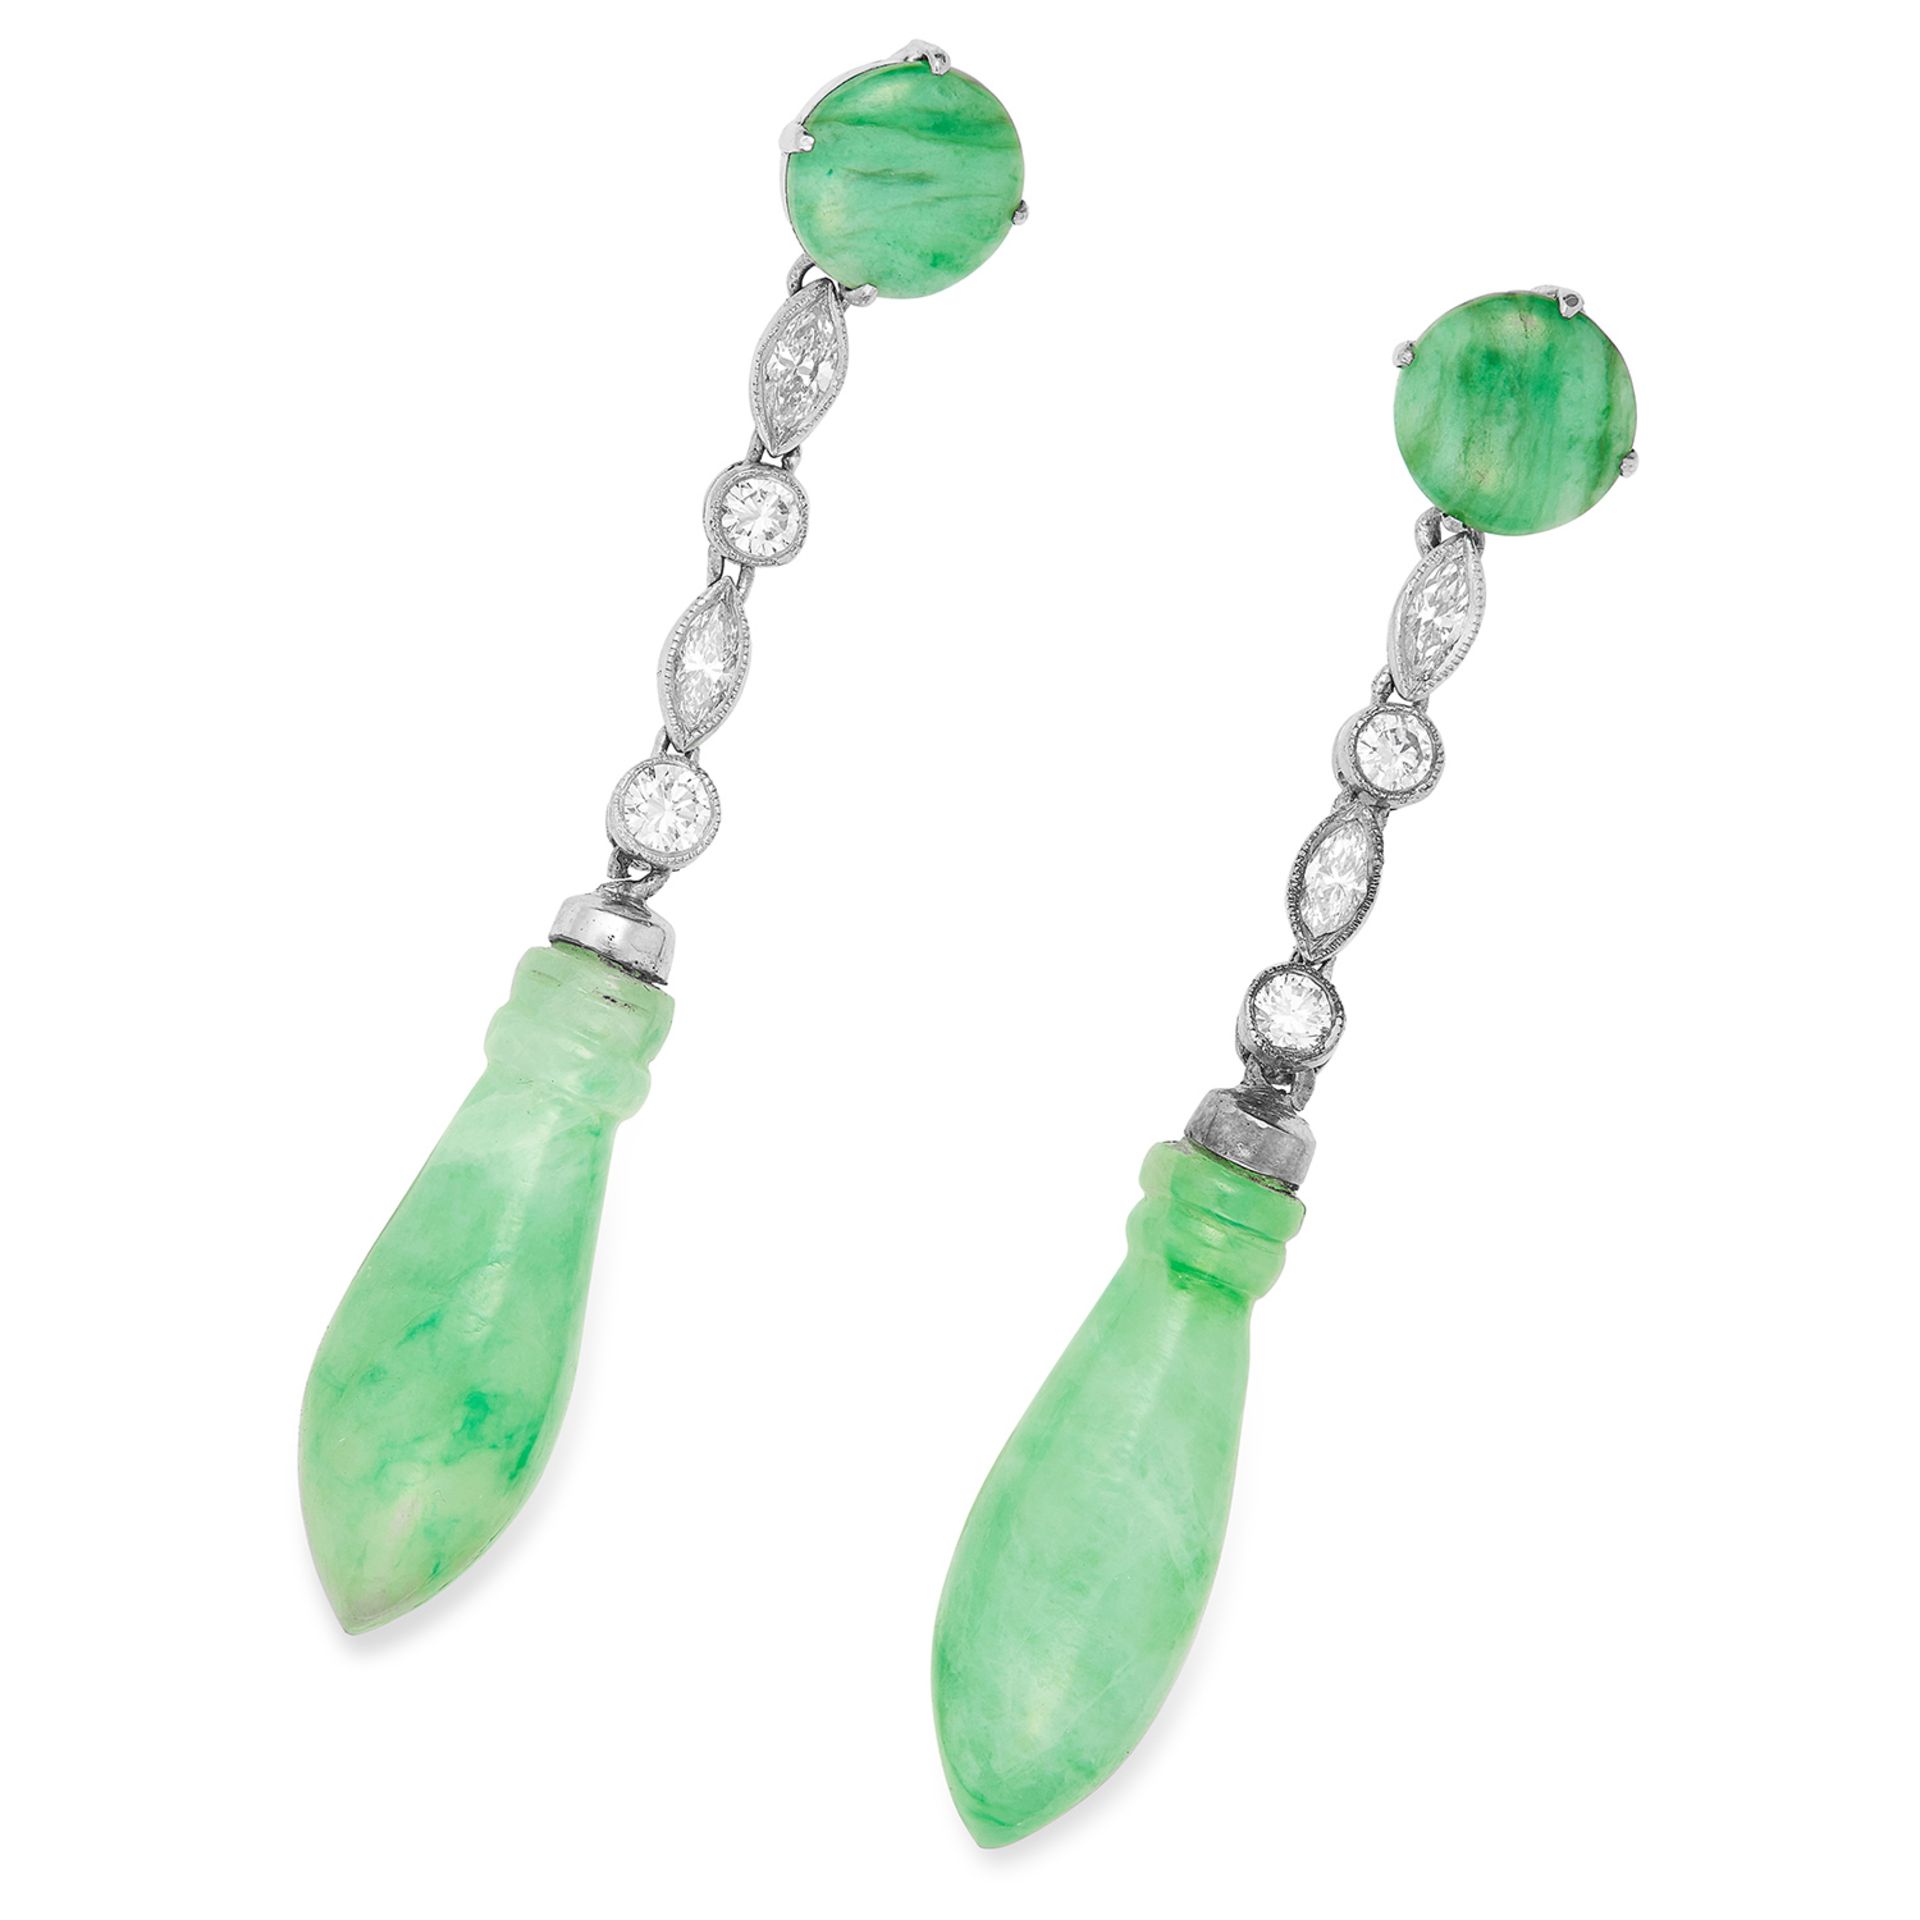 JADEITE JADE AND DIAMOND EARRINGS in 18ct white or platinum, each set with polished jadeite jade and